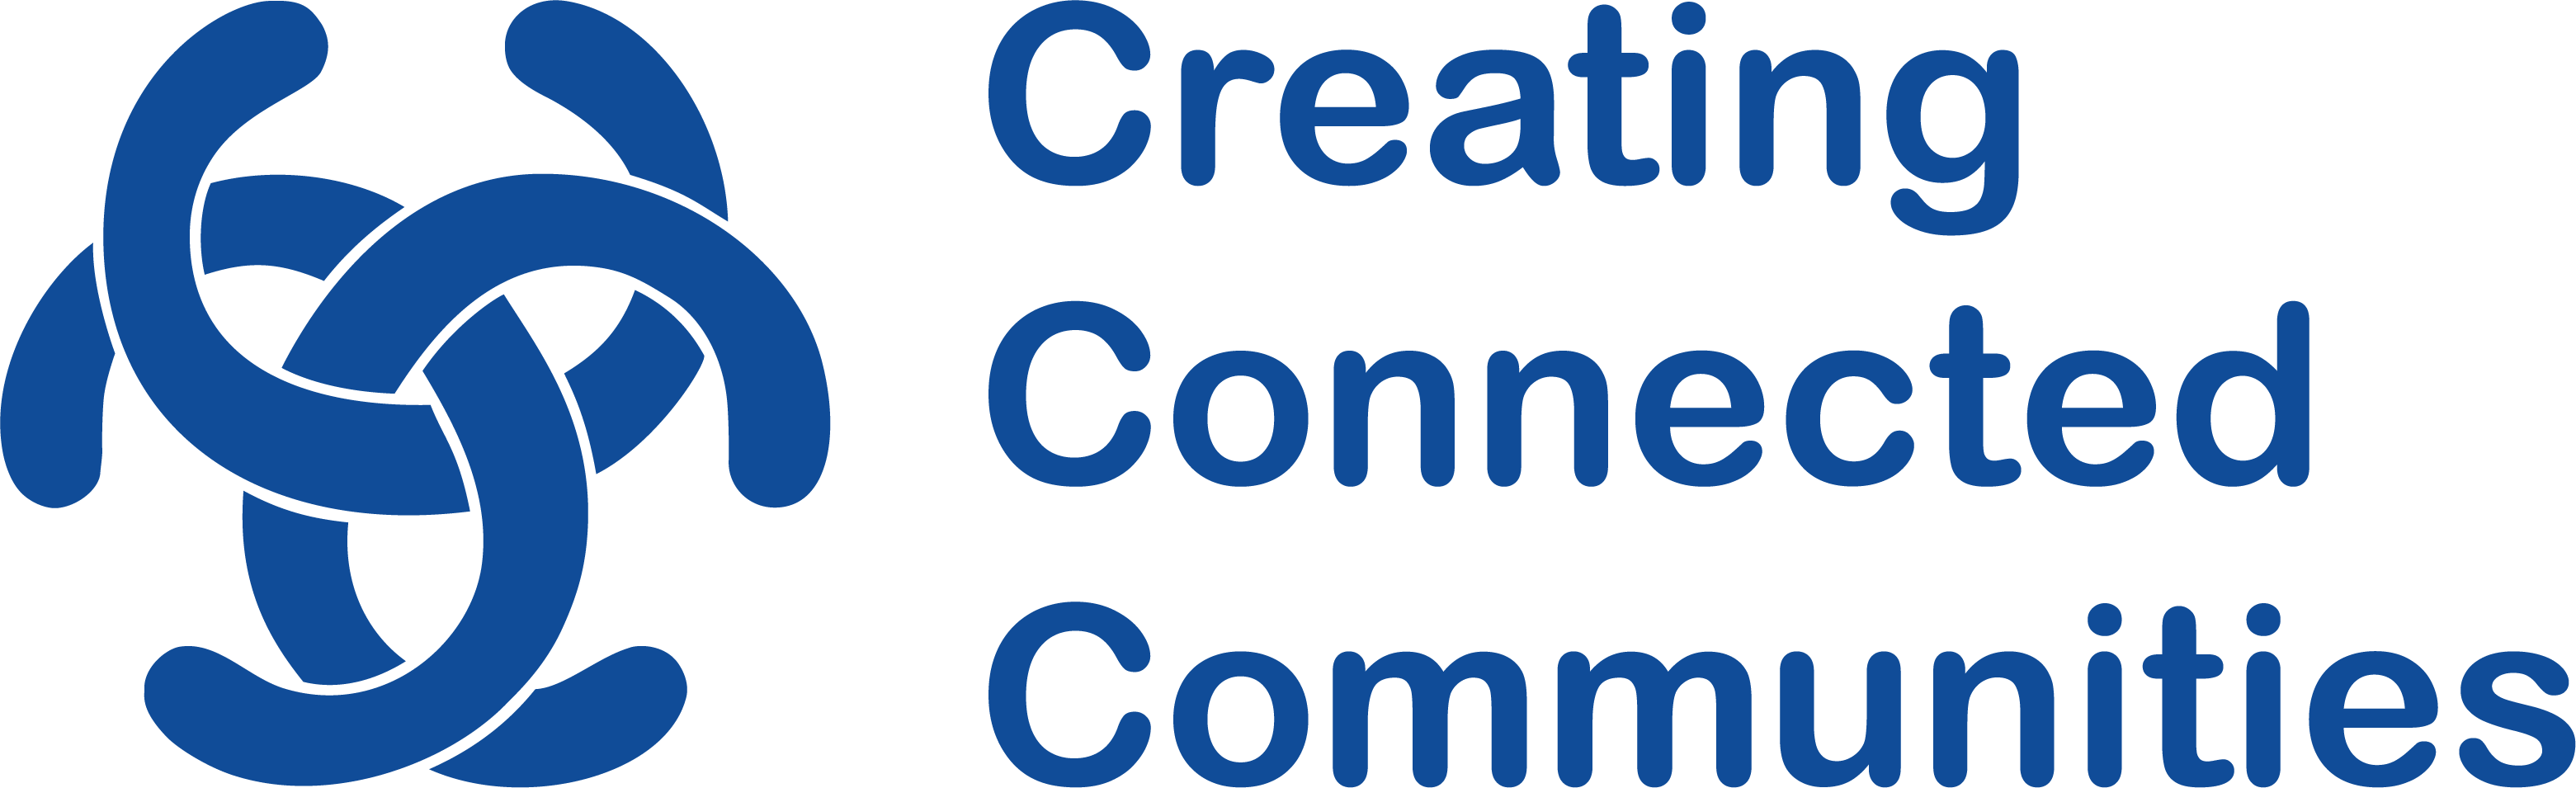 Creating Connected Communities, Inc